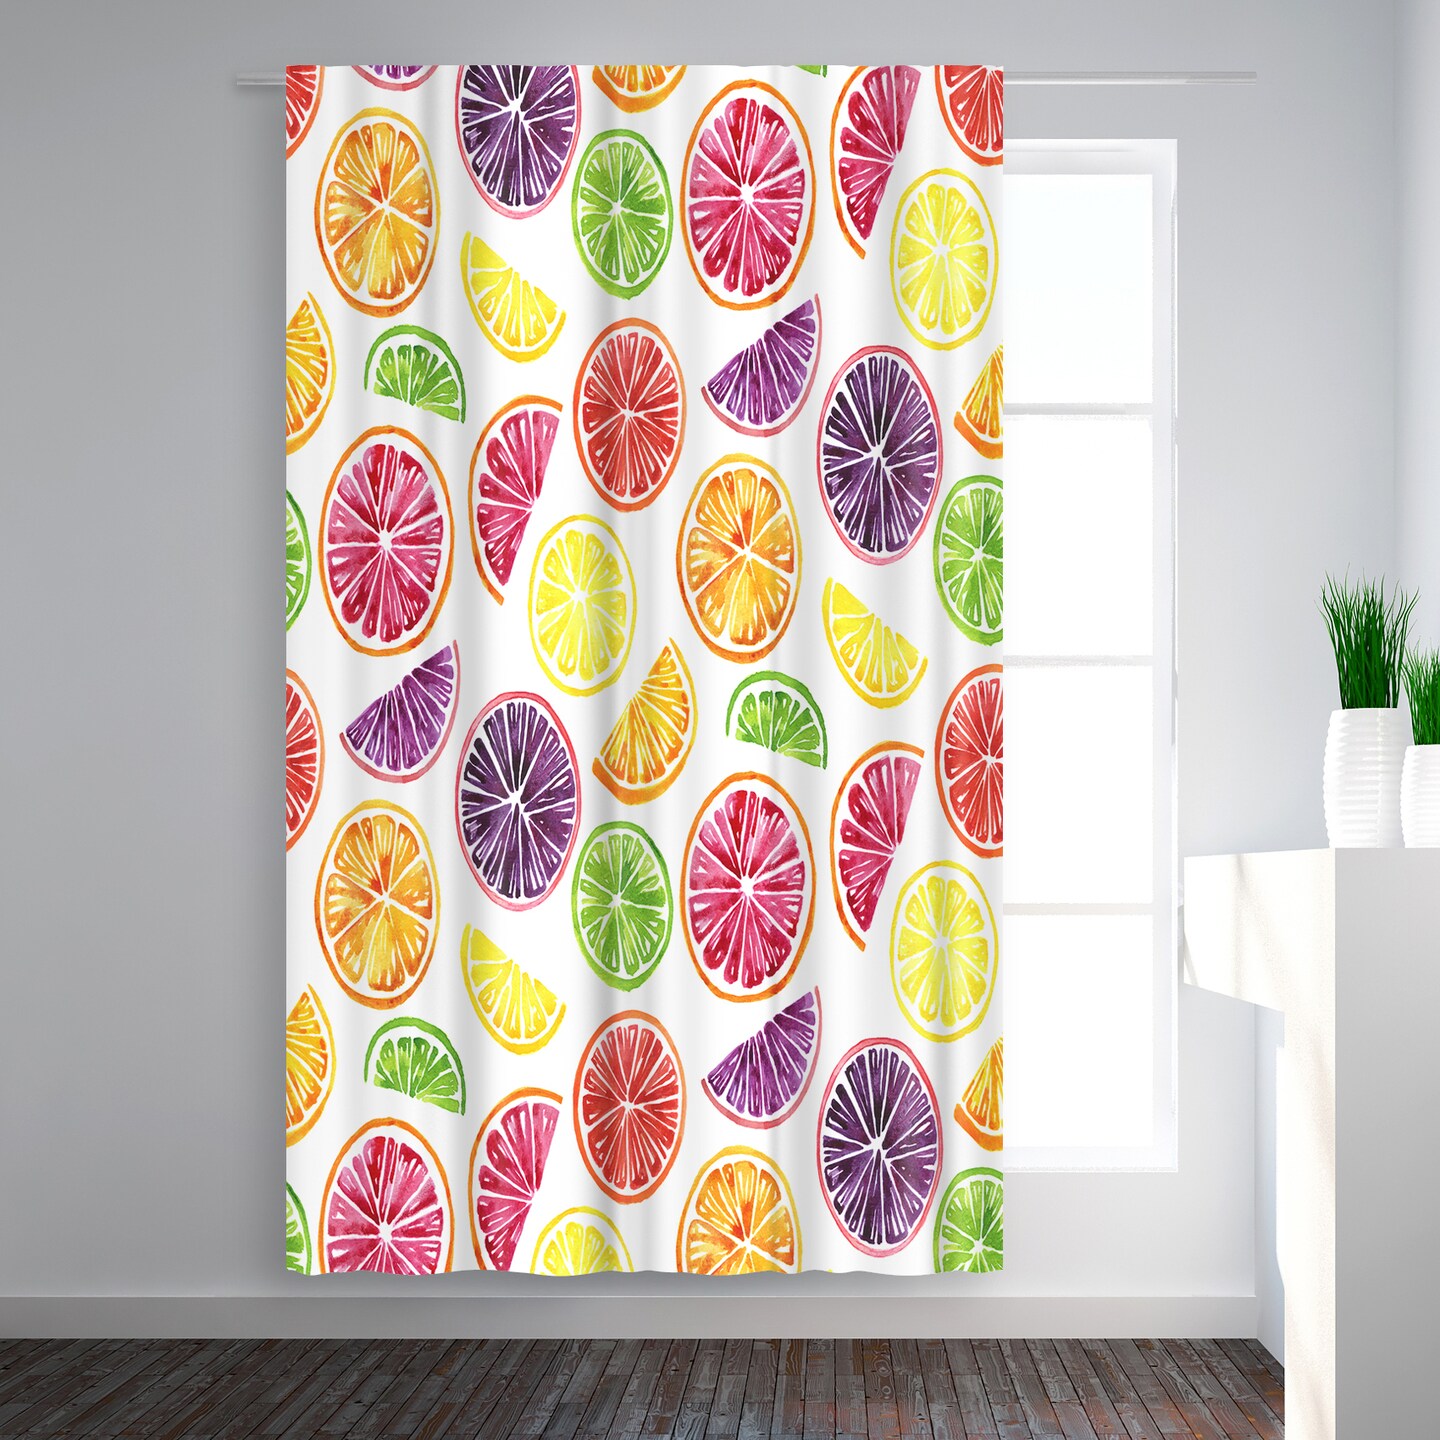 Citrus Wheels Repeat Tile Colorful White by Sam Nagel Blackout Rod Pocket Single Curtain Shade Panel 50x84